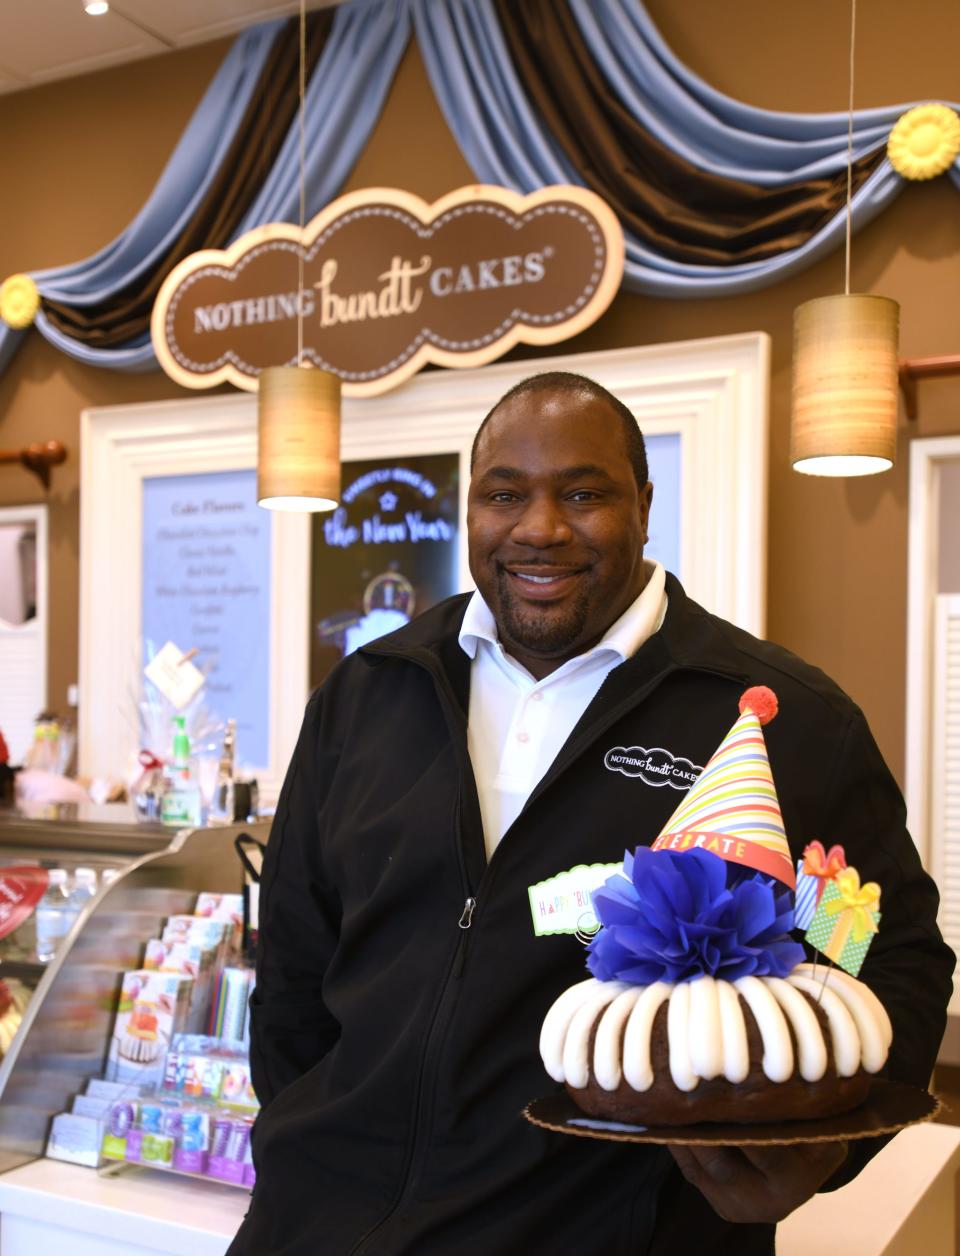 Owned by retired NFL defensive end Kenny Peterson, Nothing Bundt Cakes specializes in bundt cakes in every size.